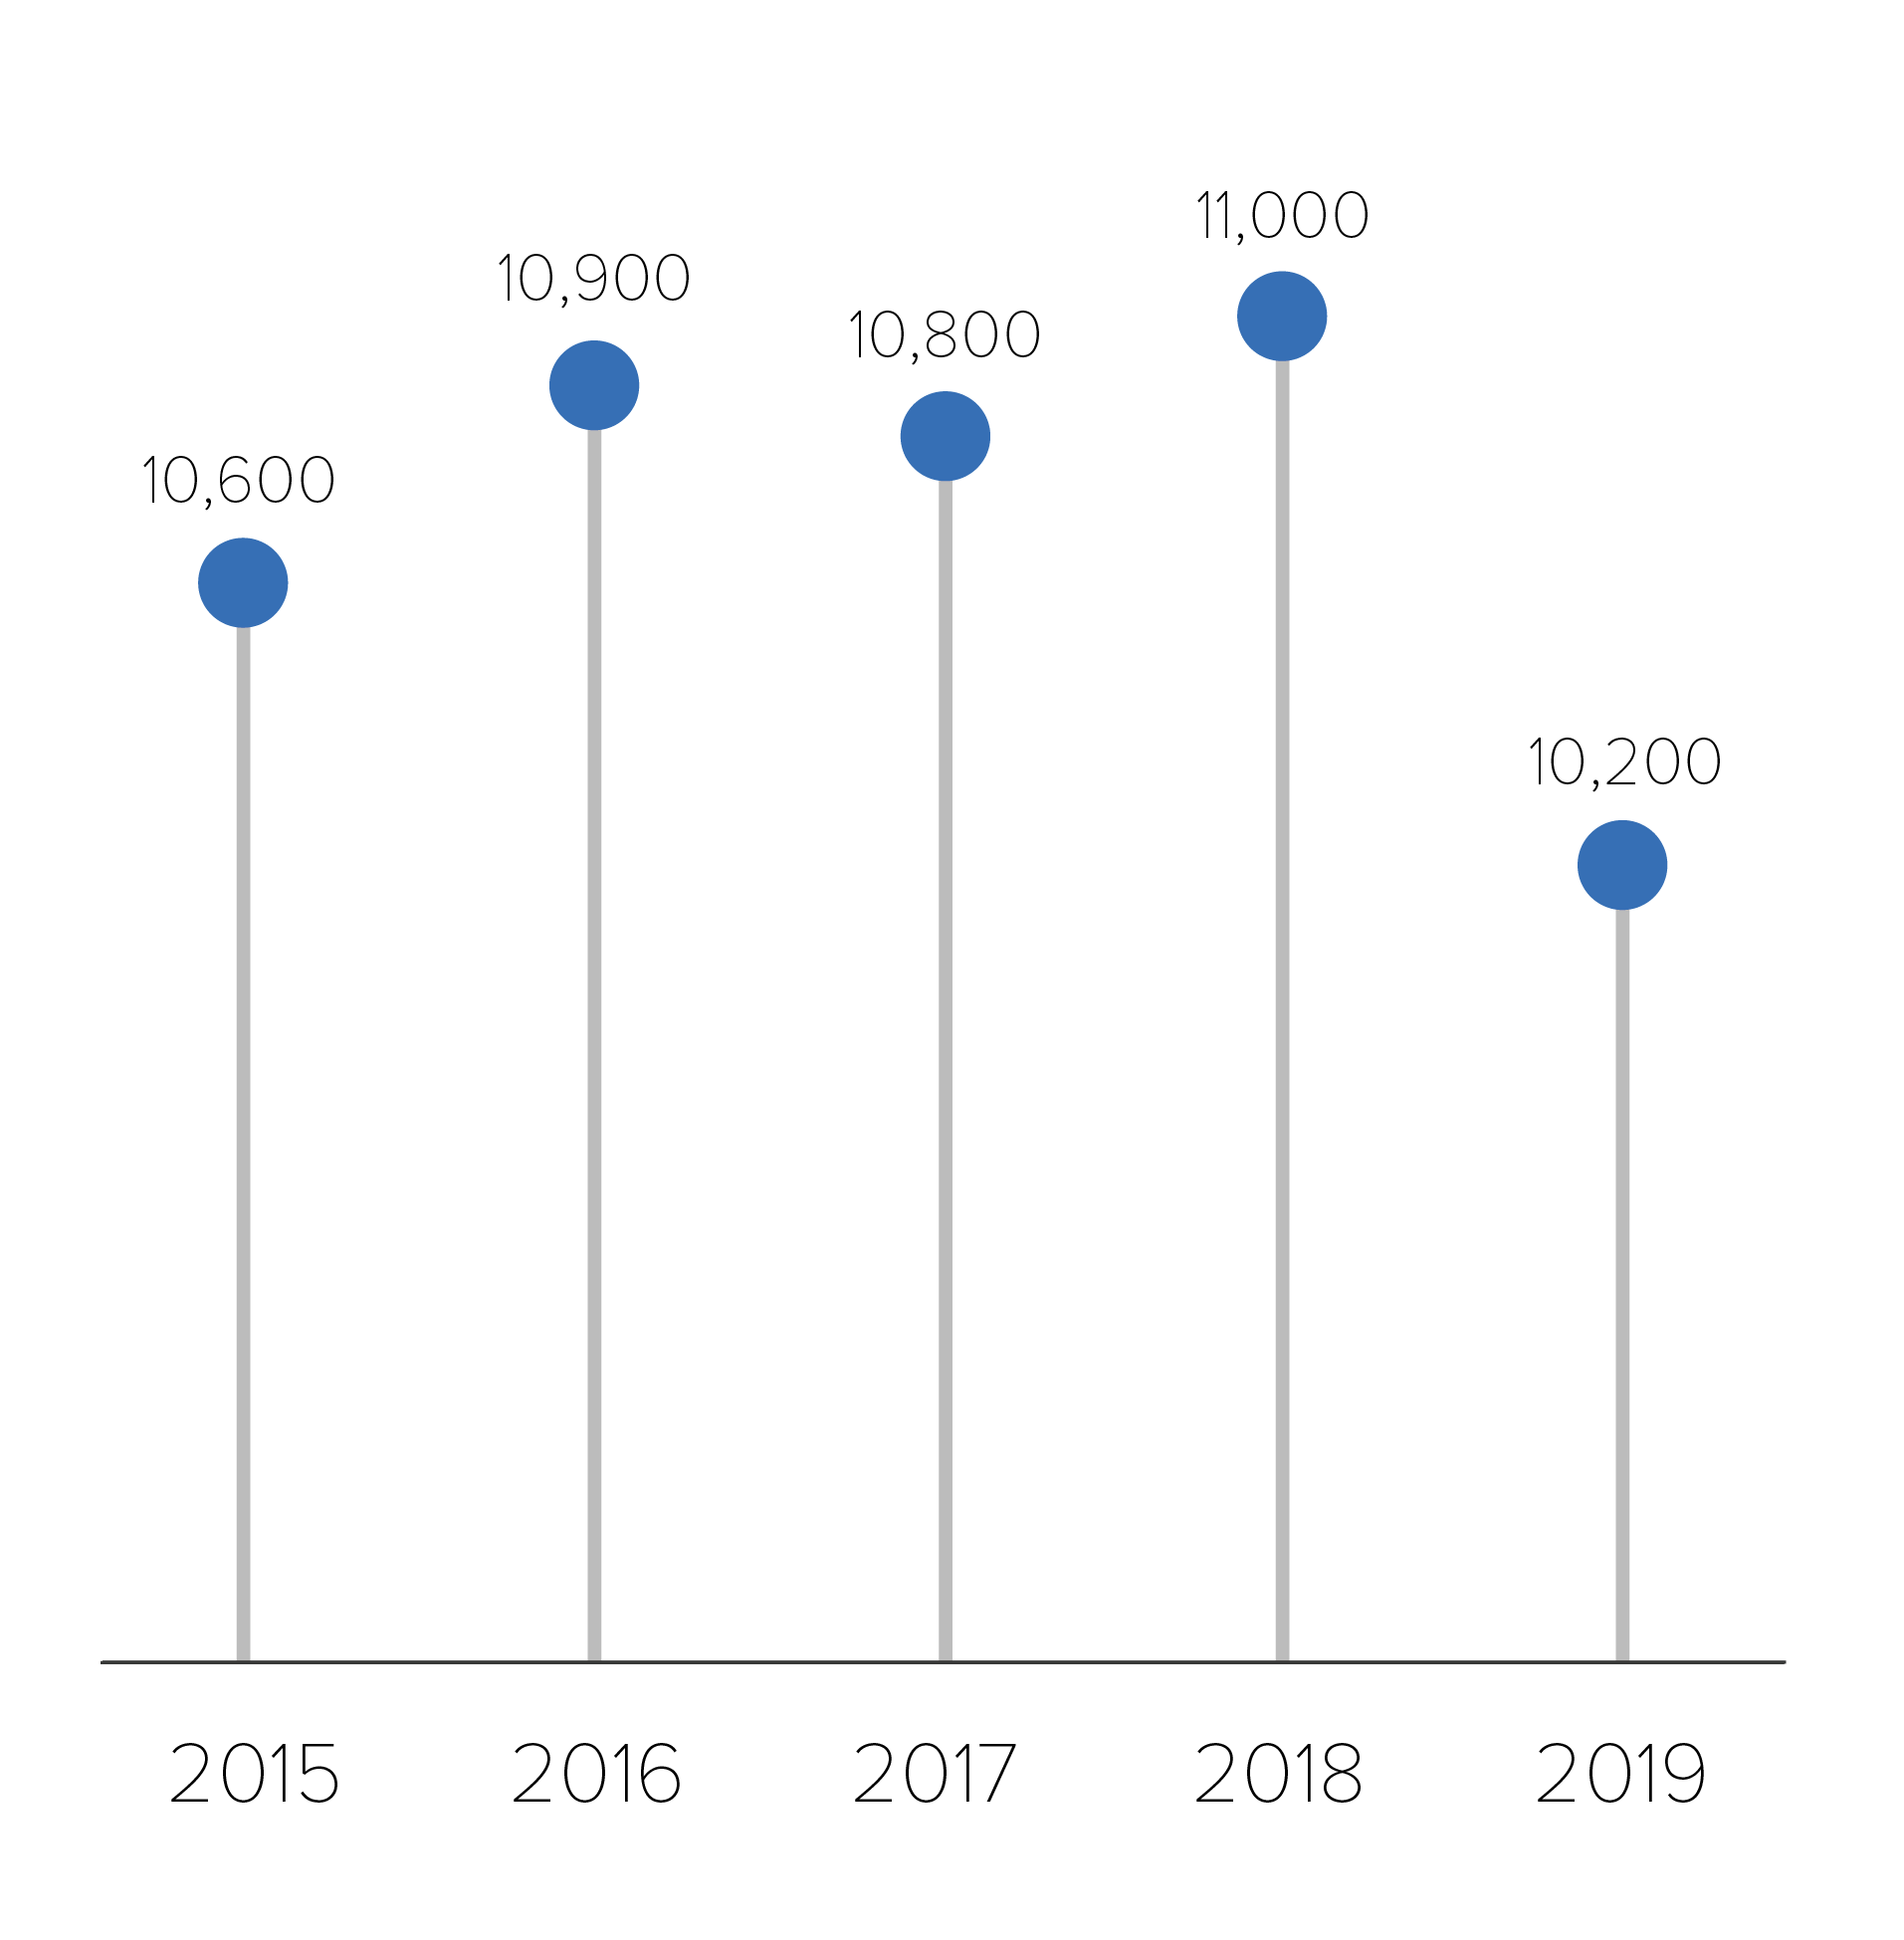 This chart shows the number of estimated HIV infections among Hispanic/Latino people from 2015 to 2019.